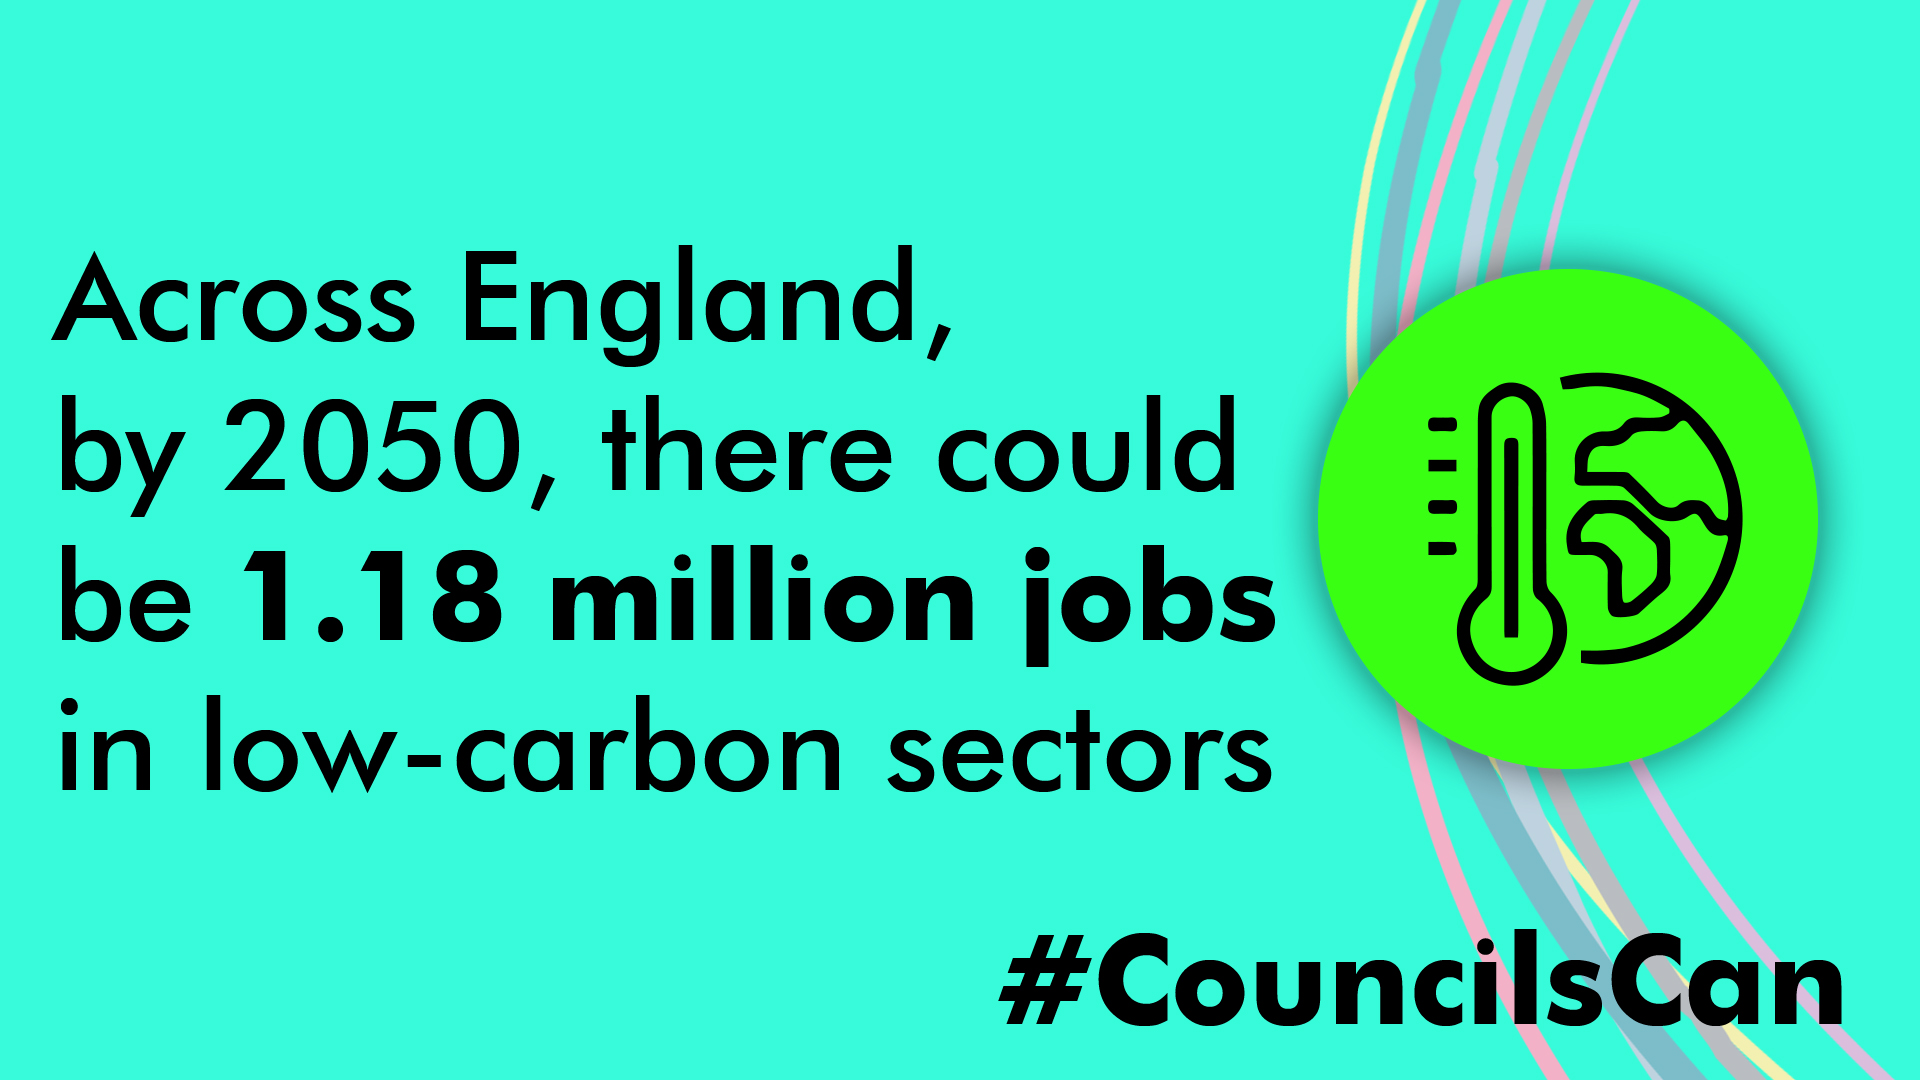 Across England, by 2050, there could be 1.18 million jobs in low-carbon sectors